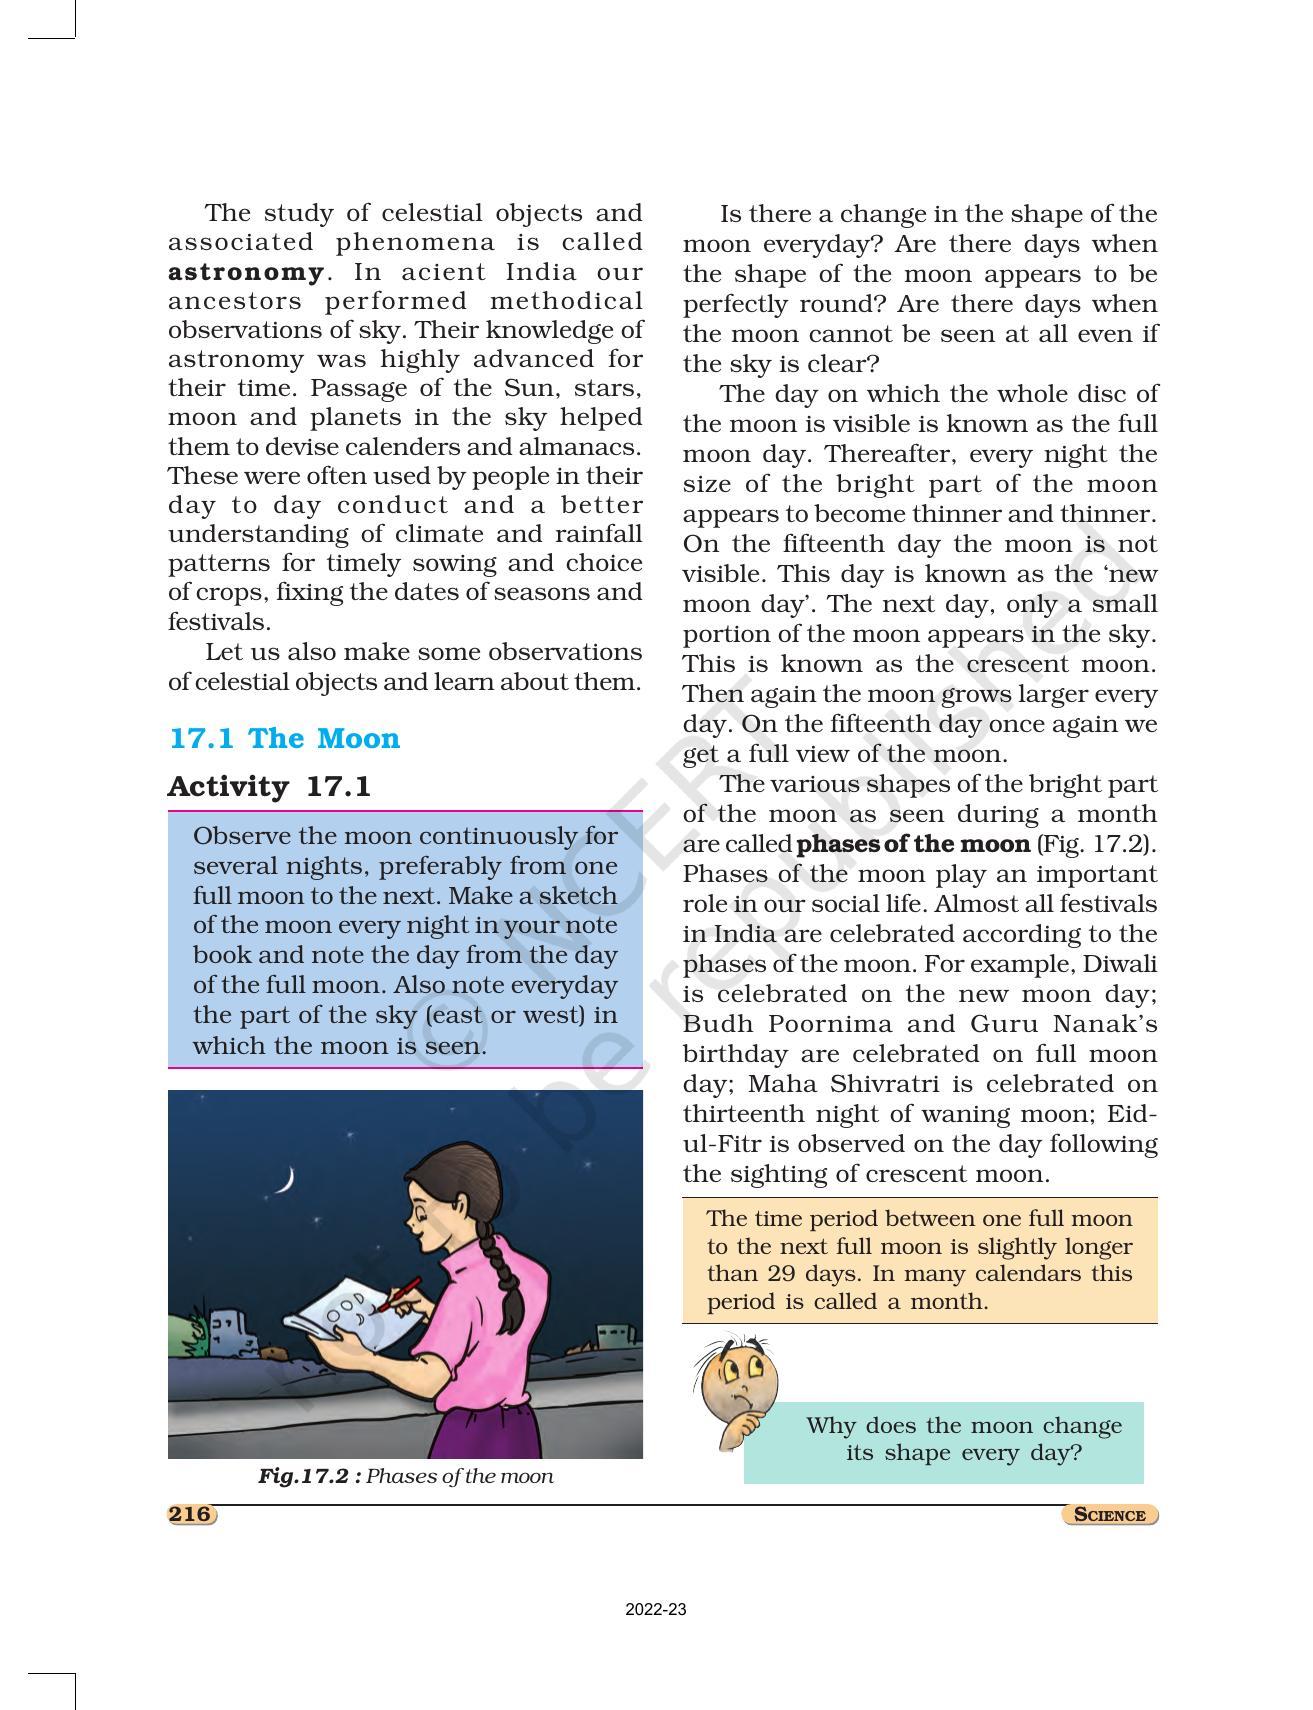 NCERT Book for Class 8 Science Chapter 17 Stars and the Solar System - Page 2